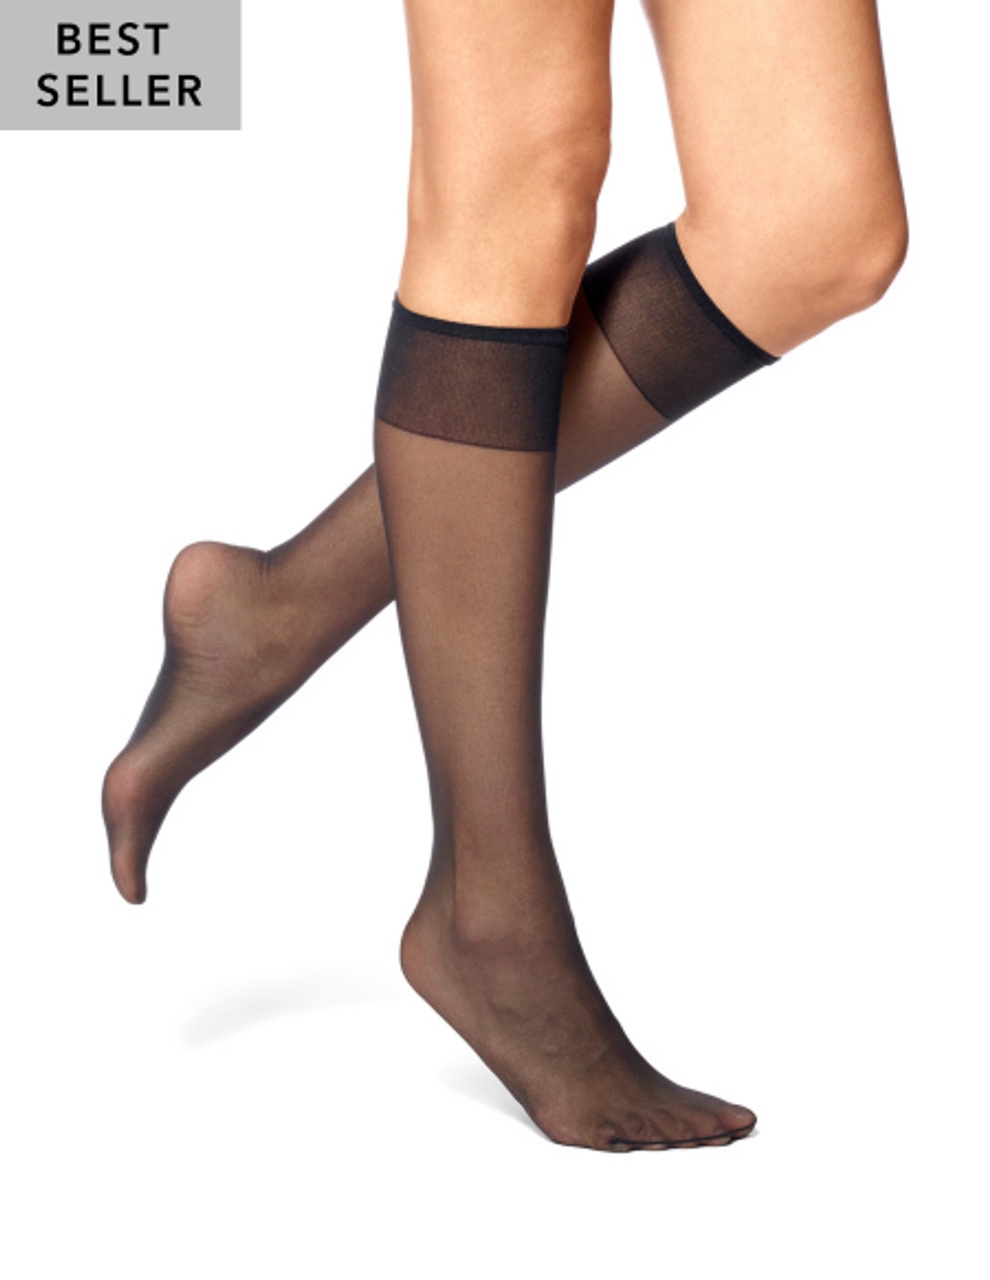 No Nonsense Control Top Pantyhose, Reinforced Toe, Size B, Nude - 1 pair